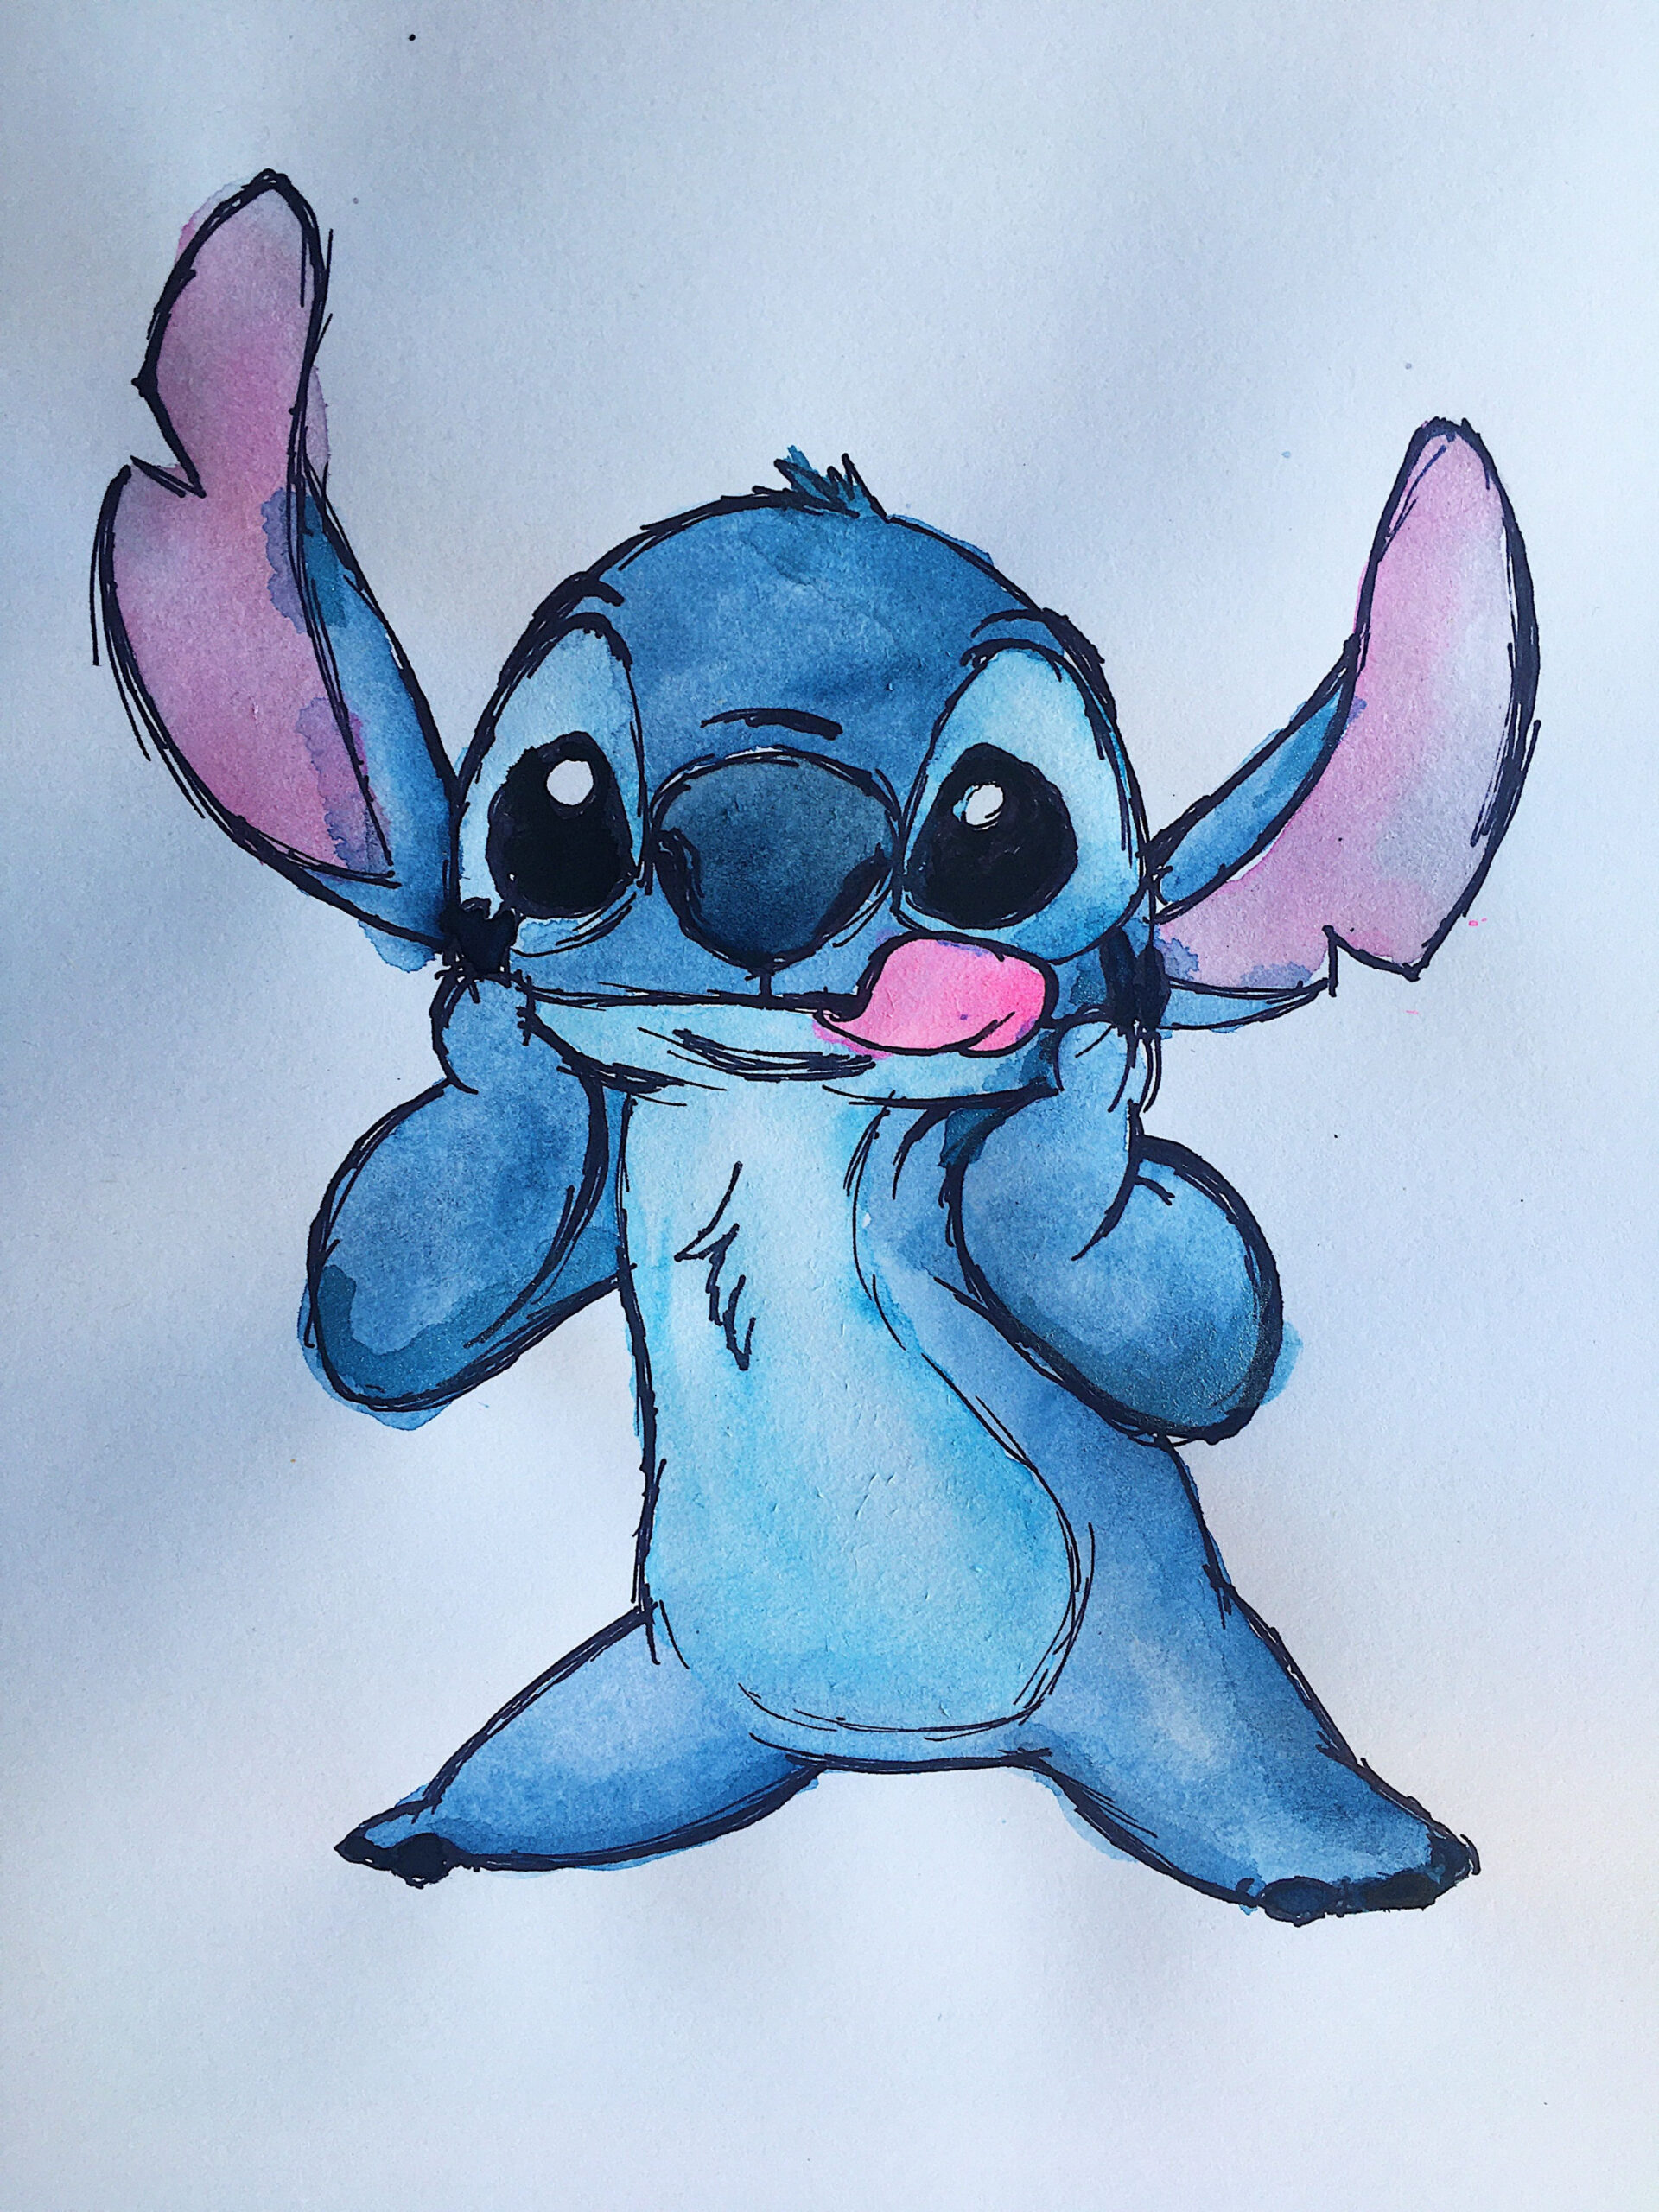 Stitch Watercolor Painting Ideas - Stitch Drawing from Lilo and